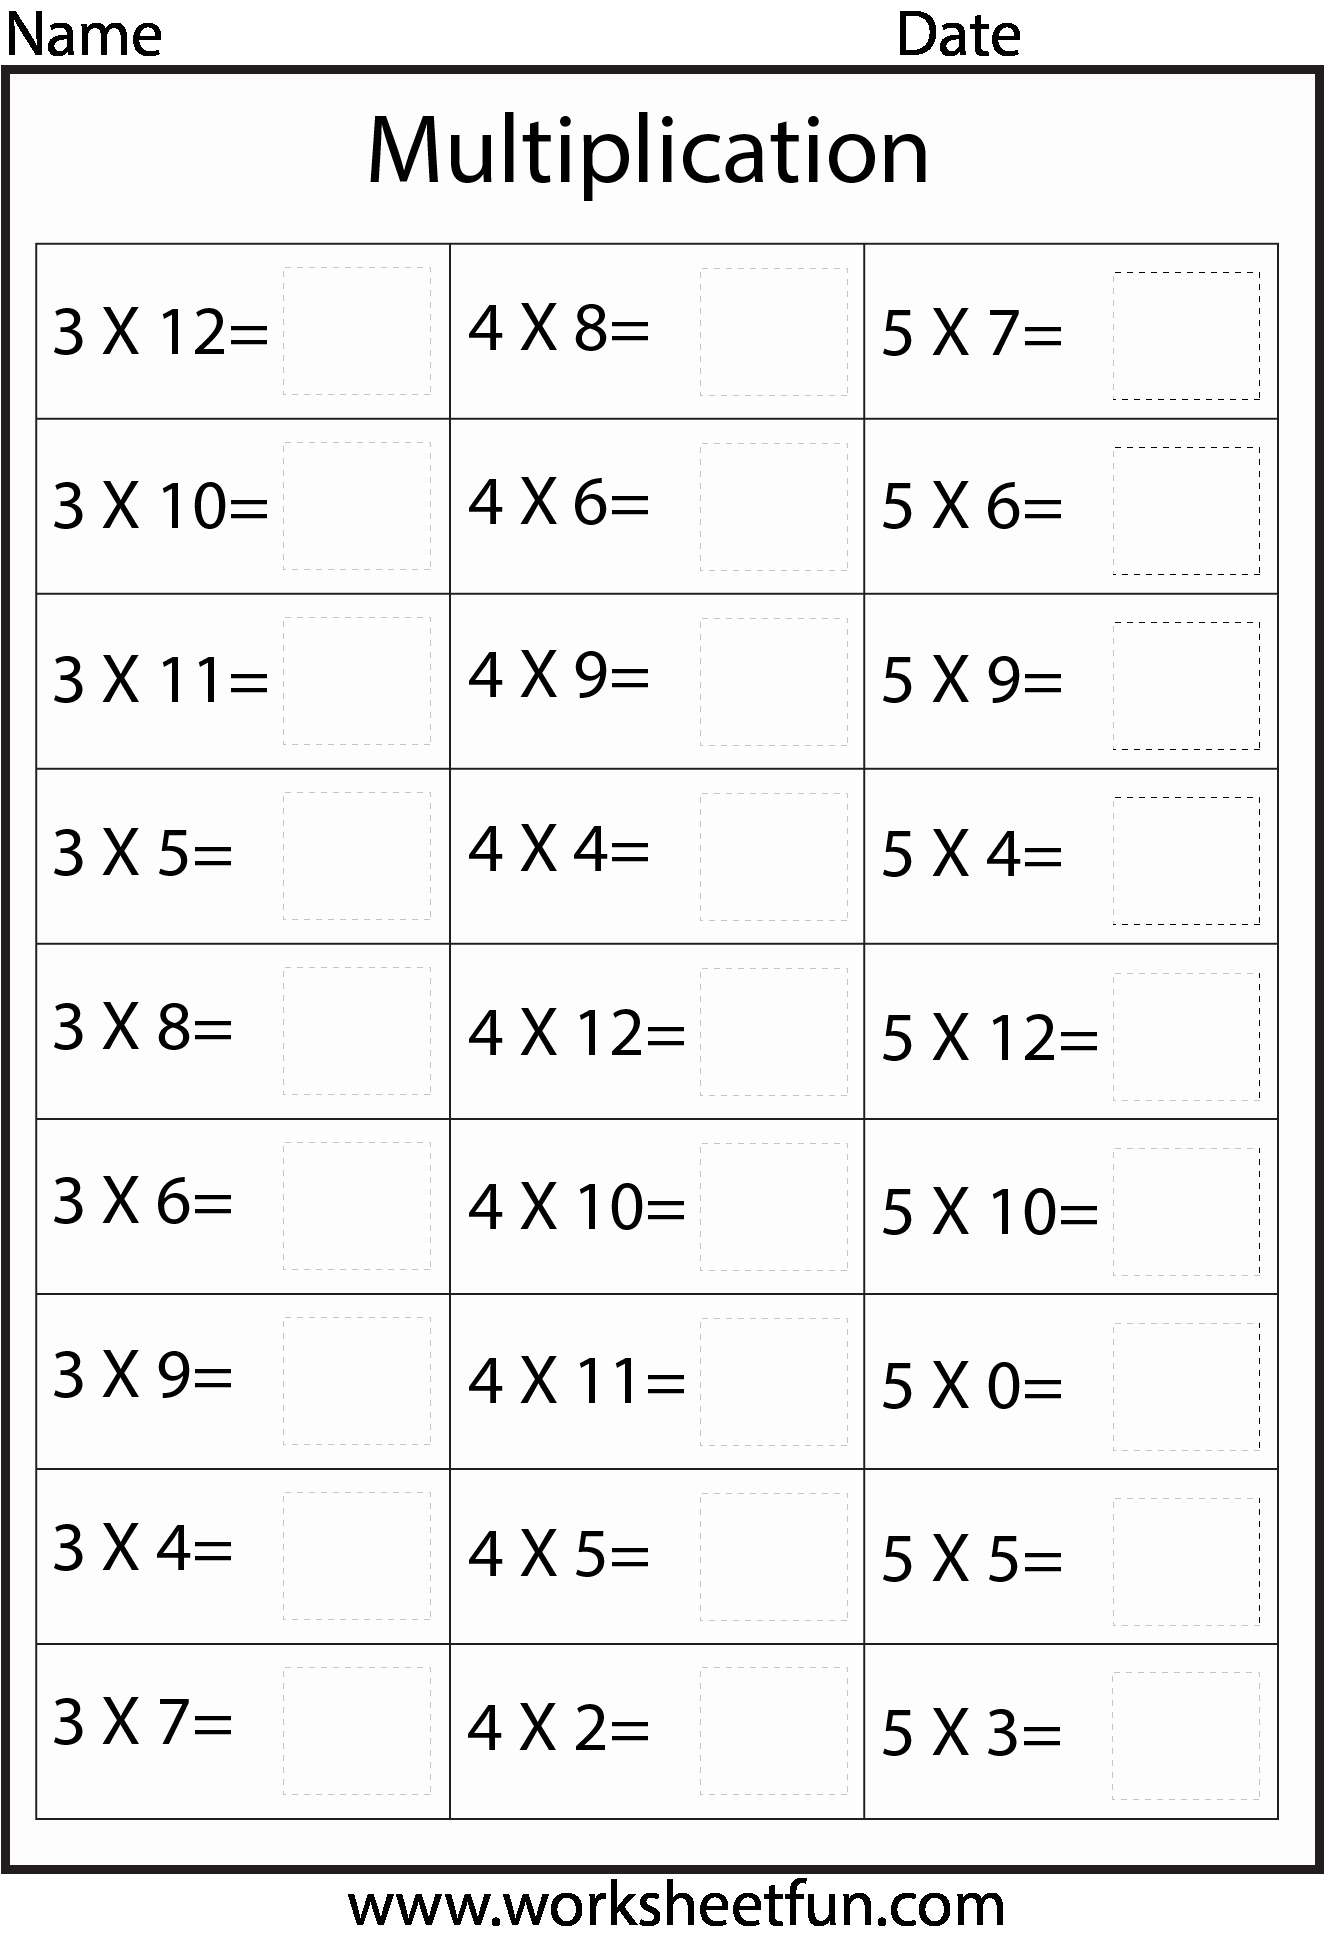 Free Printable Times Tables Worksheets Awesome Multiplication – Mixed Times Tables – Ten Worksheets